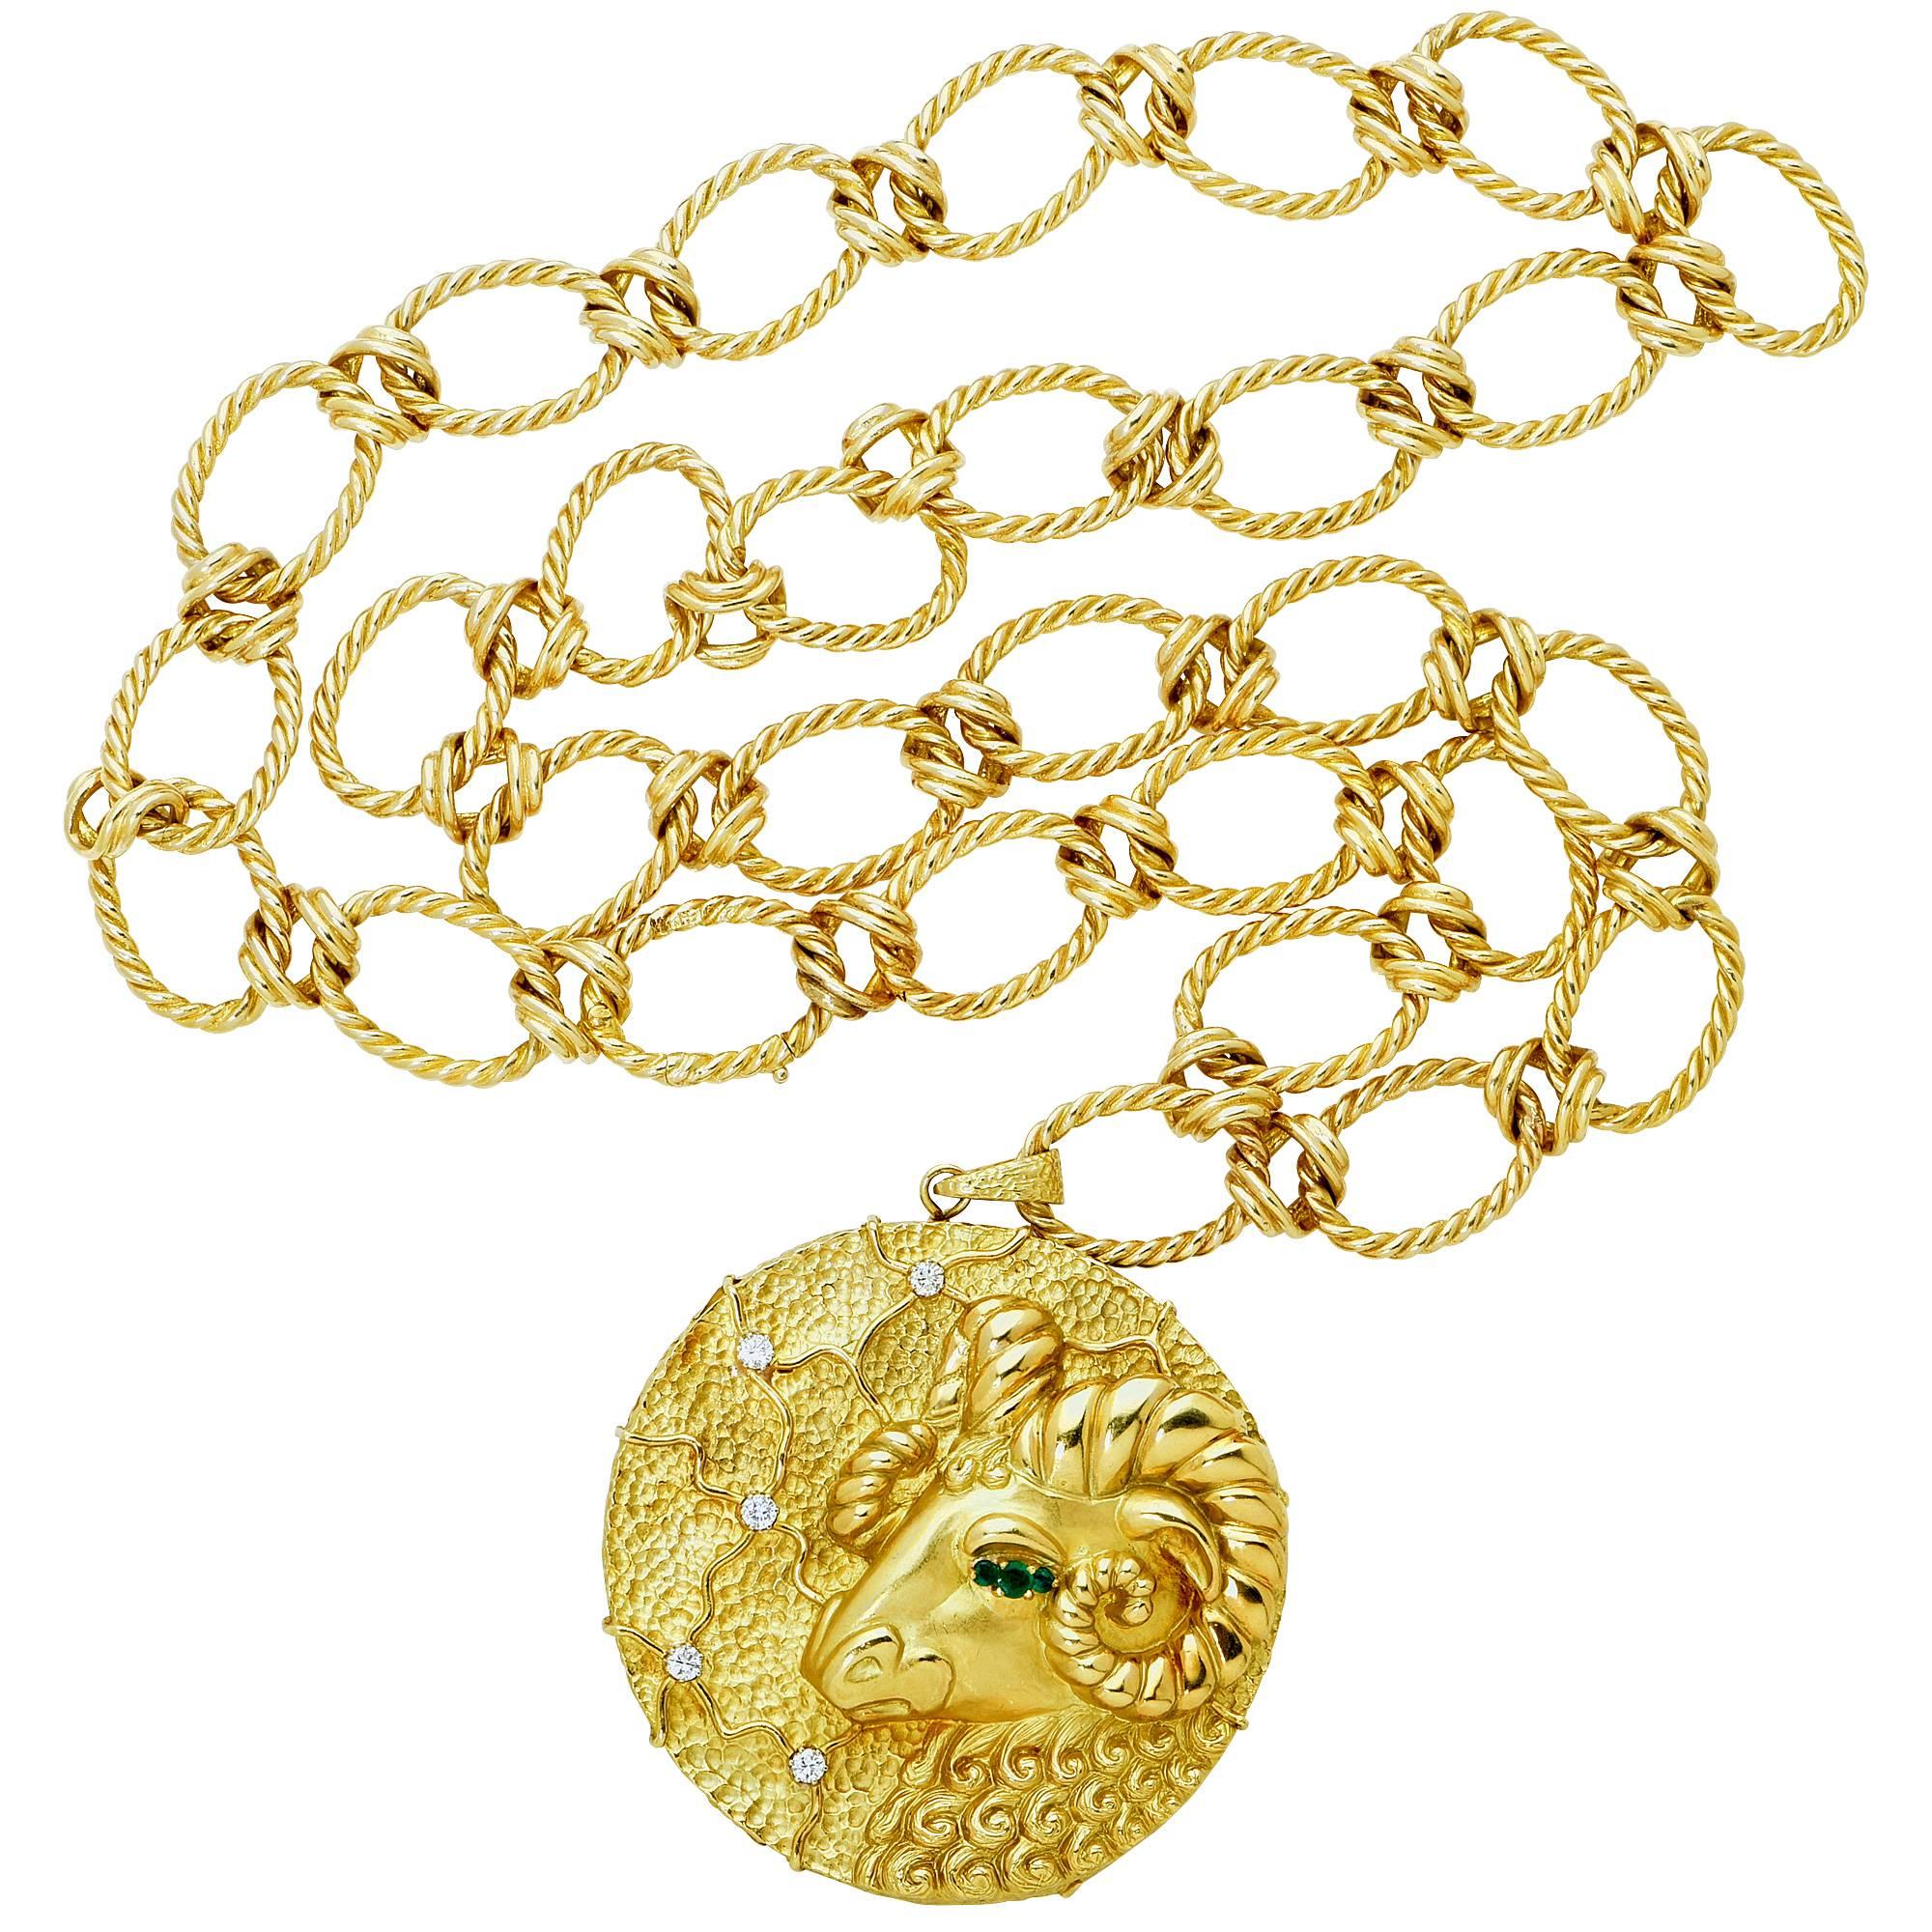 18K yellow gold necklace with a ram's head motif containing 5 round brilliant cut diamonds weighing approxiately .90cts F color and VS clarity, as well as 3 round cut emeralds weighing approximately .20cts. This unique necklace is signed